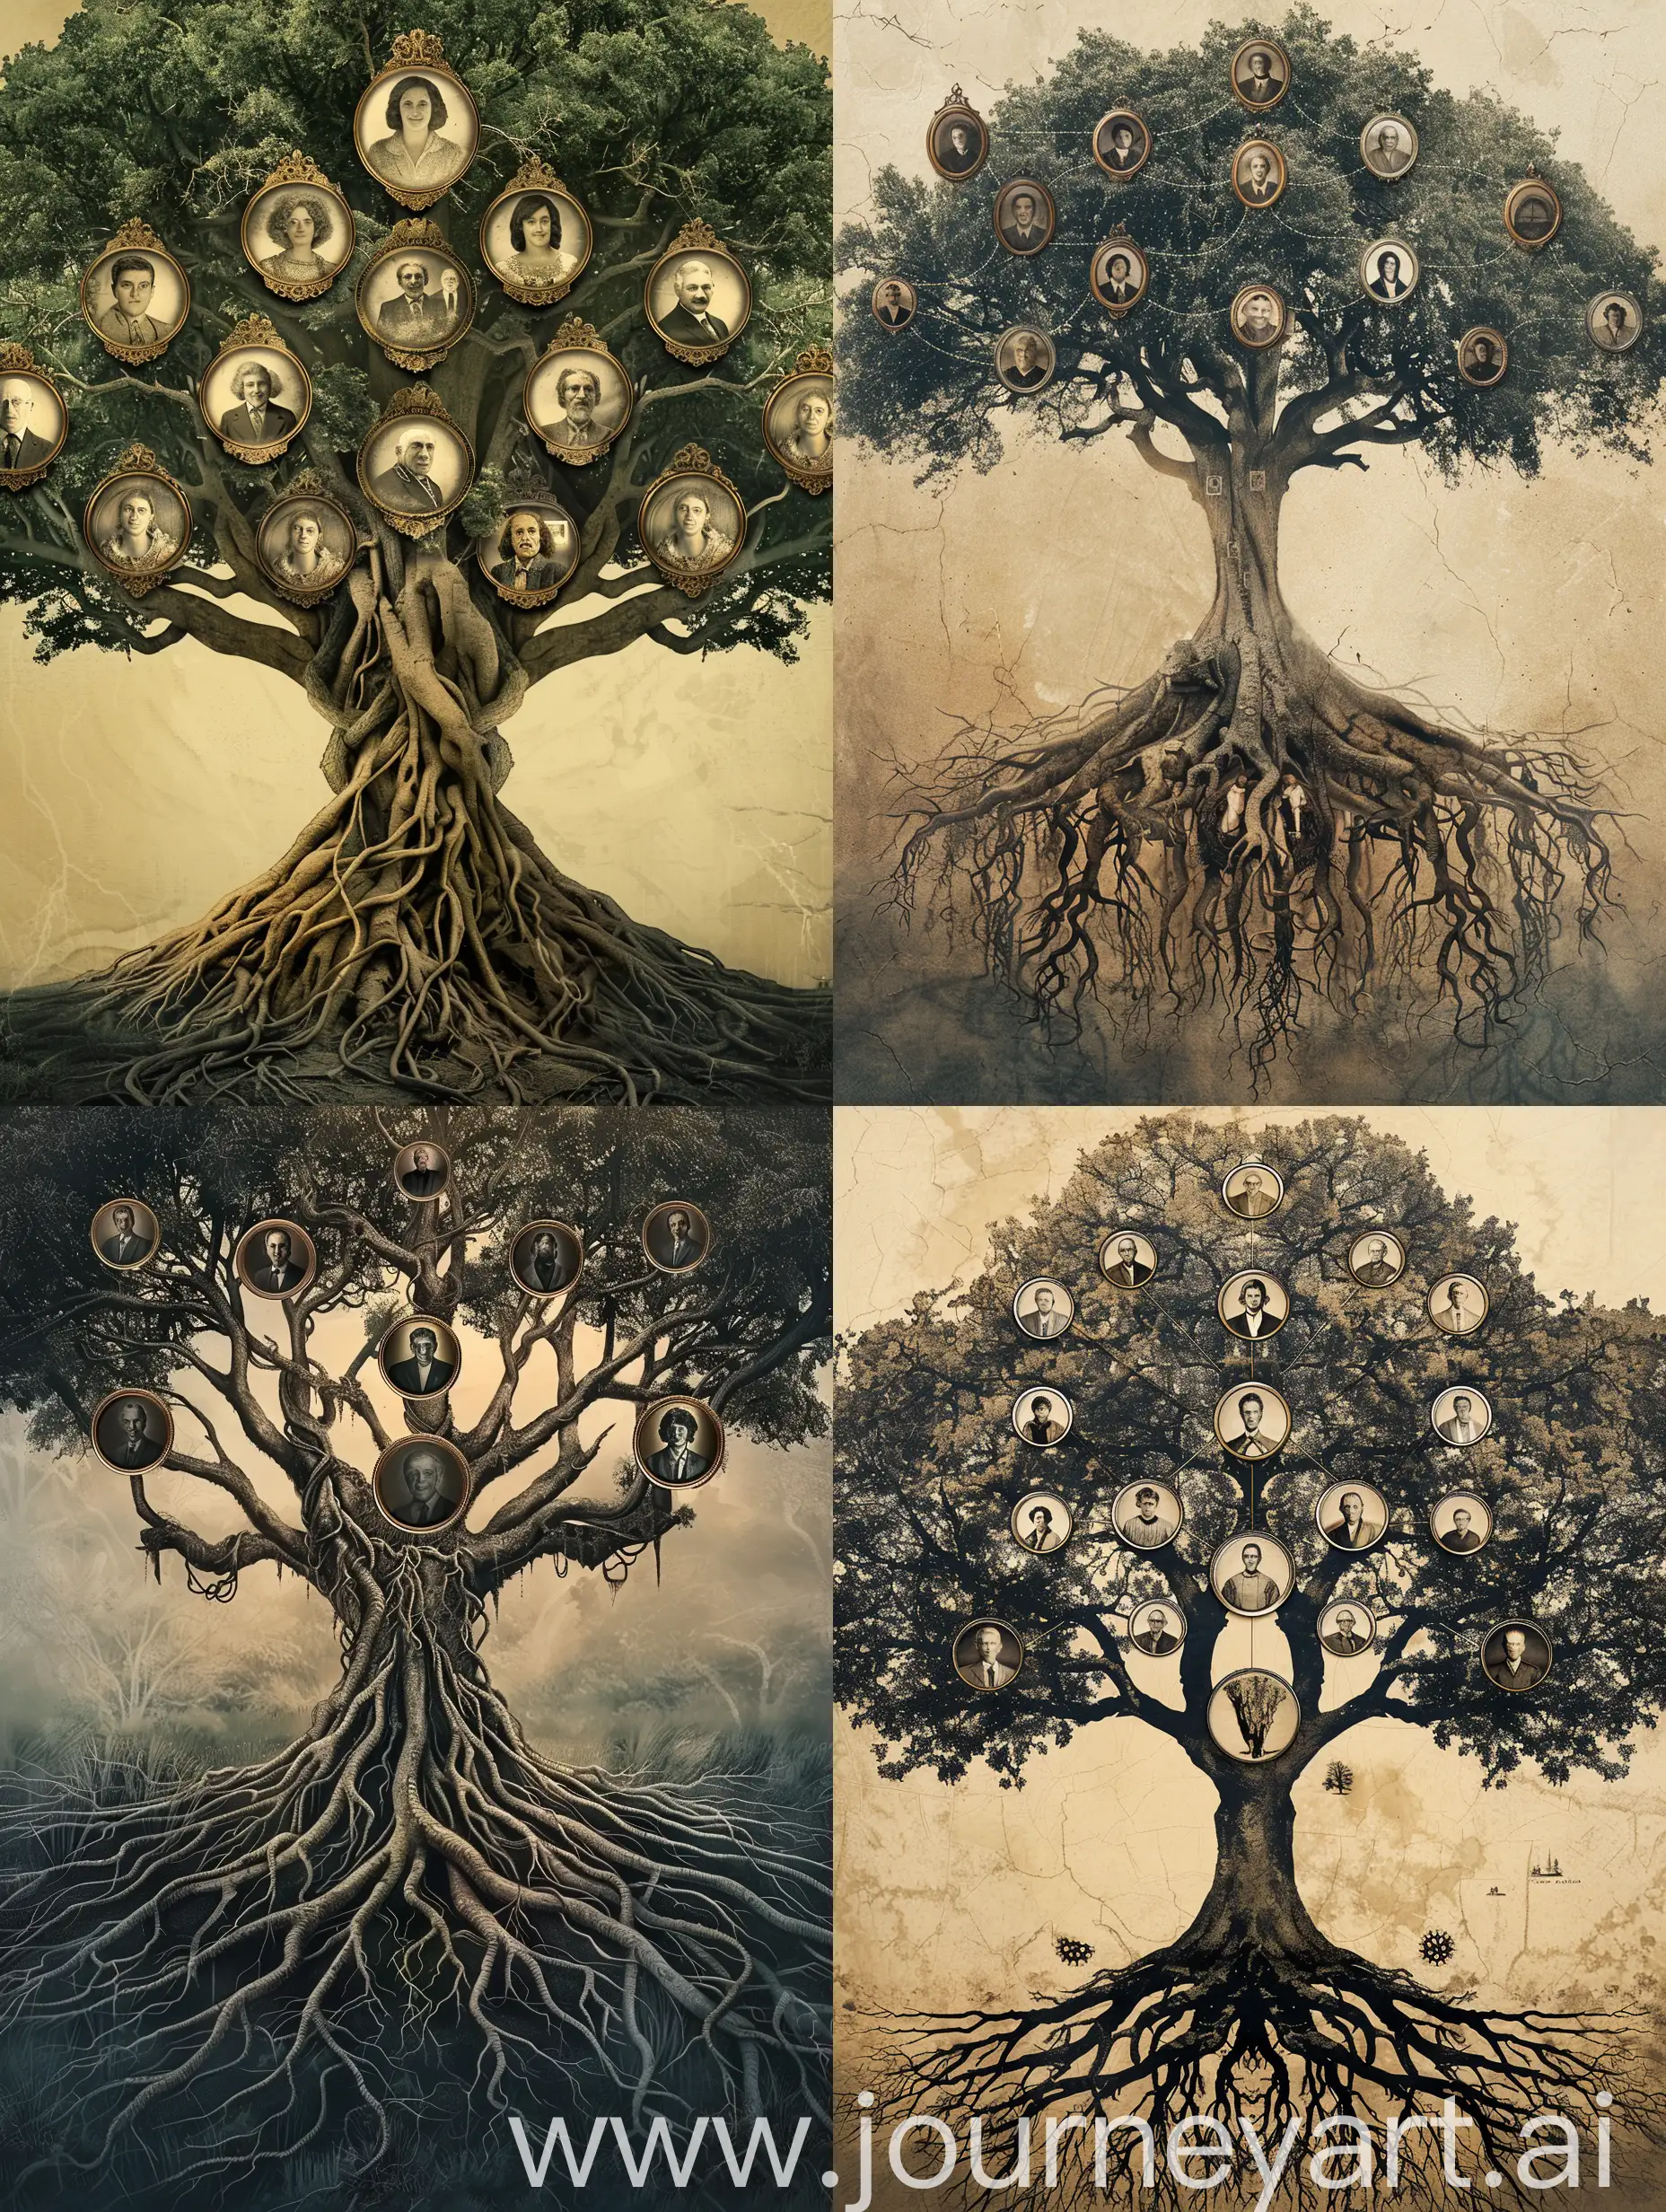 A vast, sprawling family tree with deep interlocking roots and circular framed ancestor photos on branches, radiating warmth.